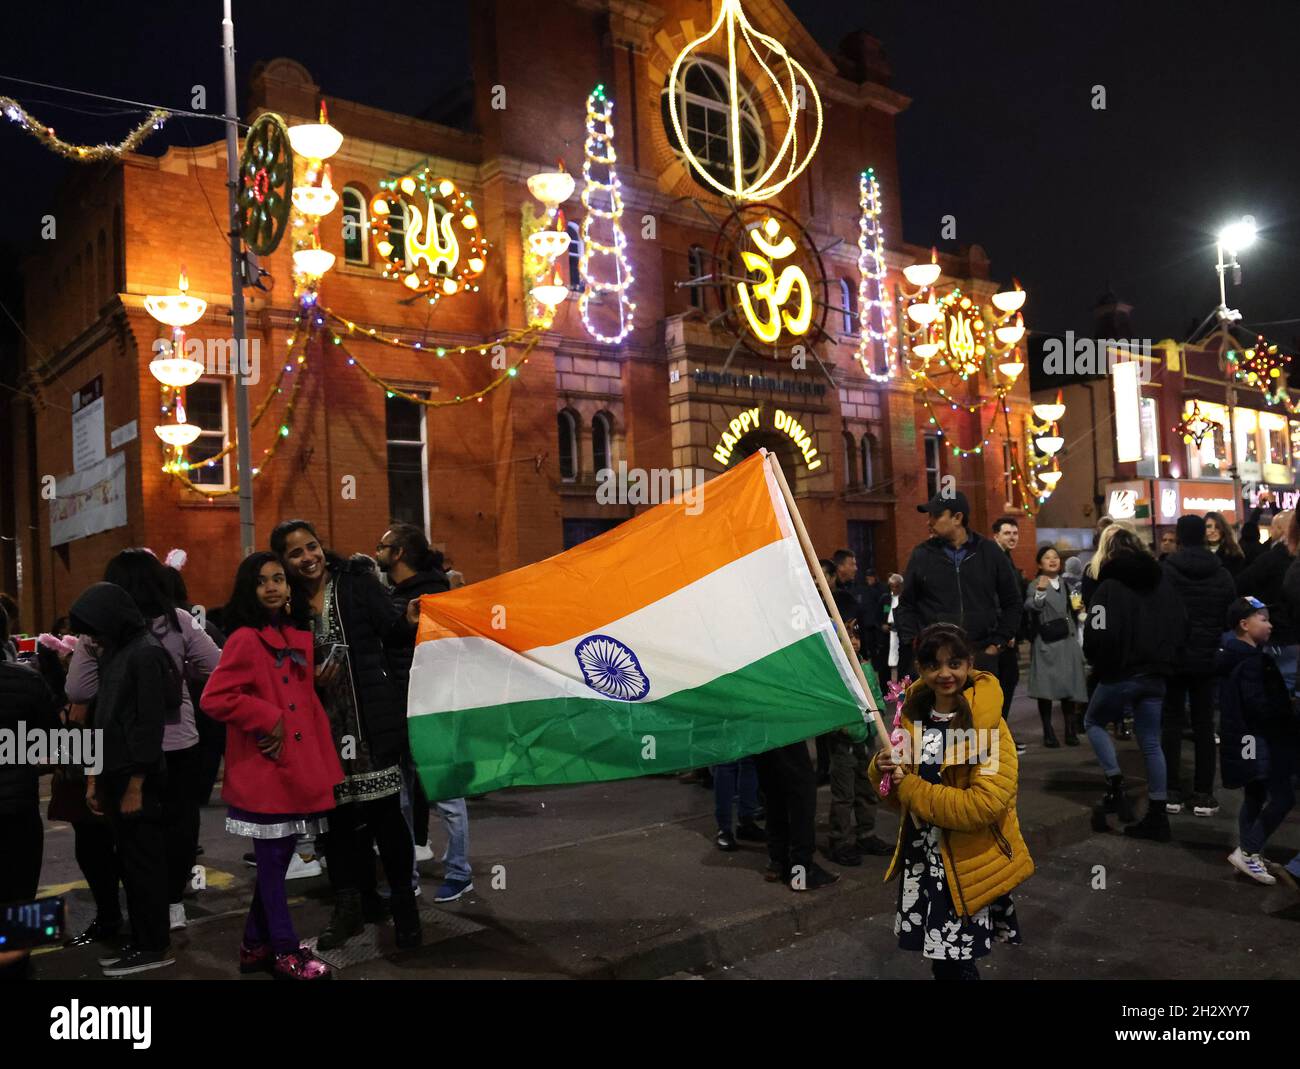 Leicester, Leicestershire, UK. 24th October 2021. A girl waves the flag of India on the Golden Mile after the Diwali lights switch on event which was different from normal with no main stage or firework display because of Covid-19 worries. Credit Darren Staples/Alamy Live News. Stock Photo